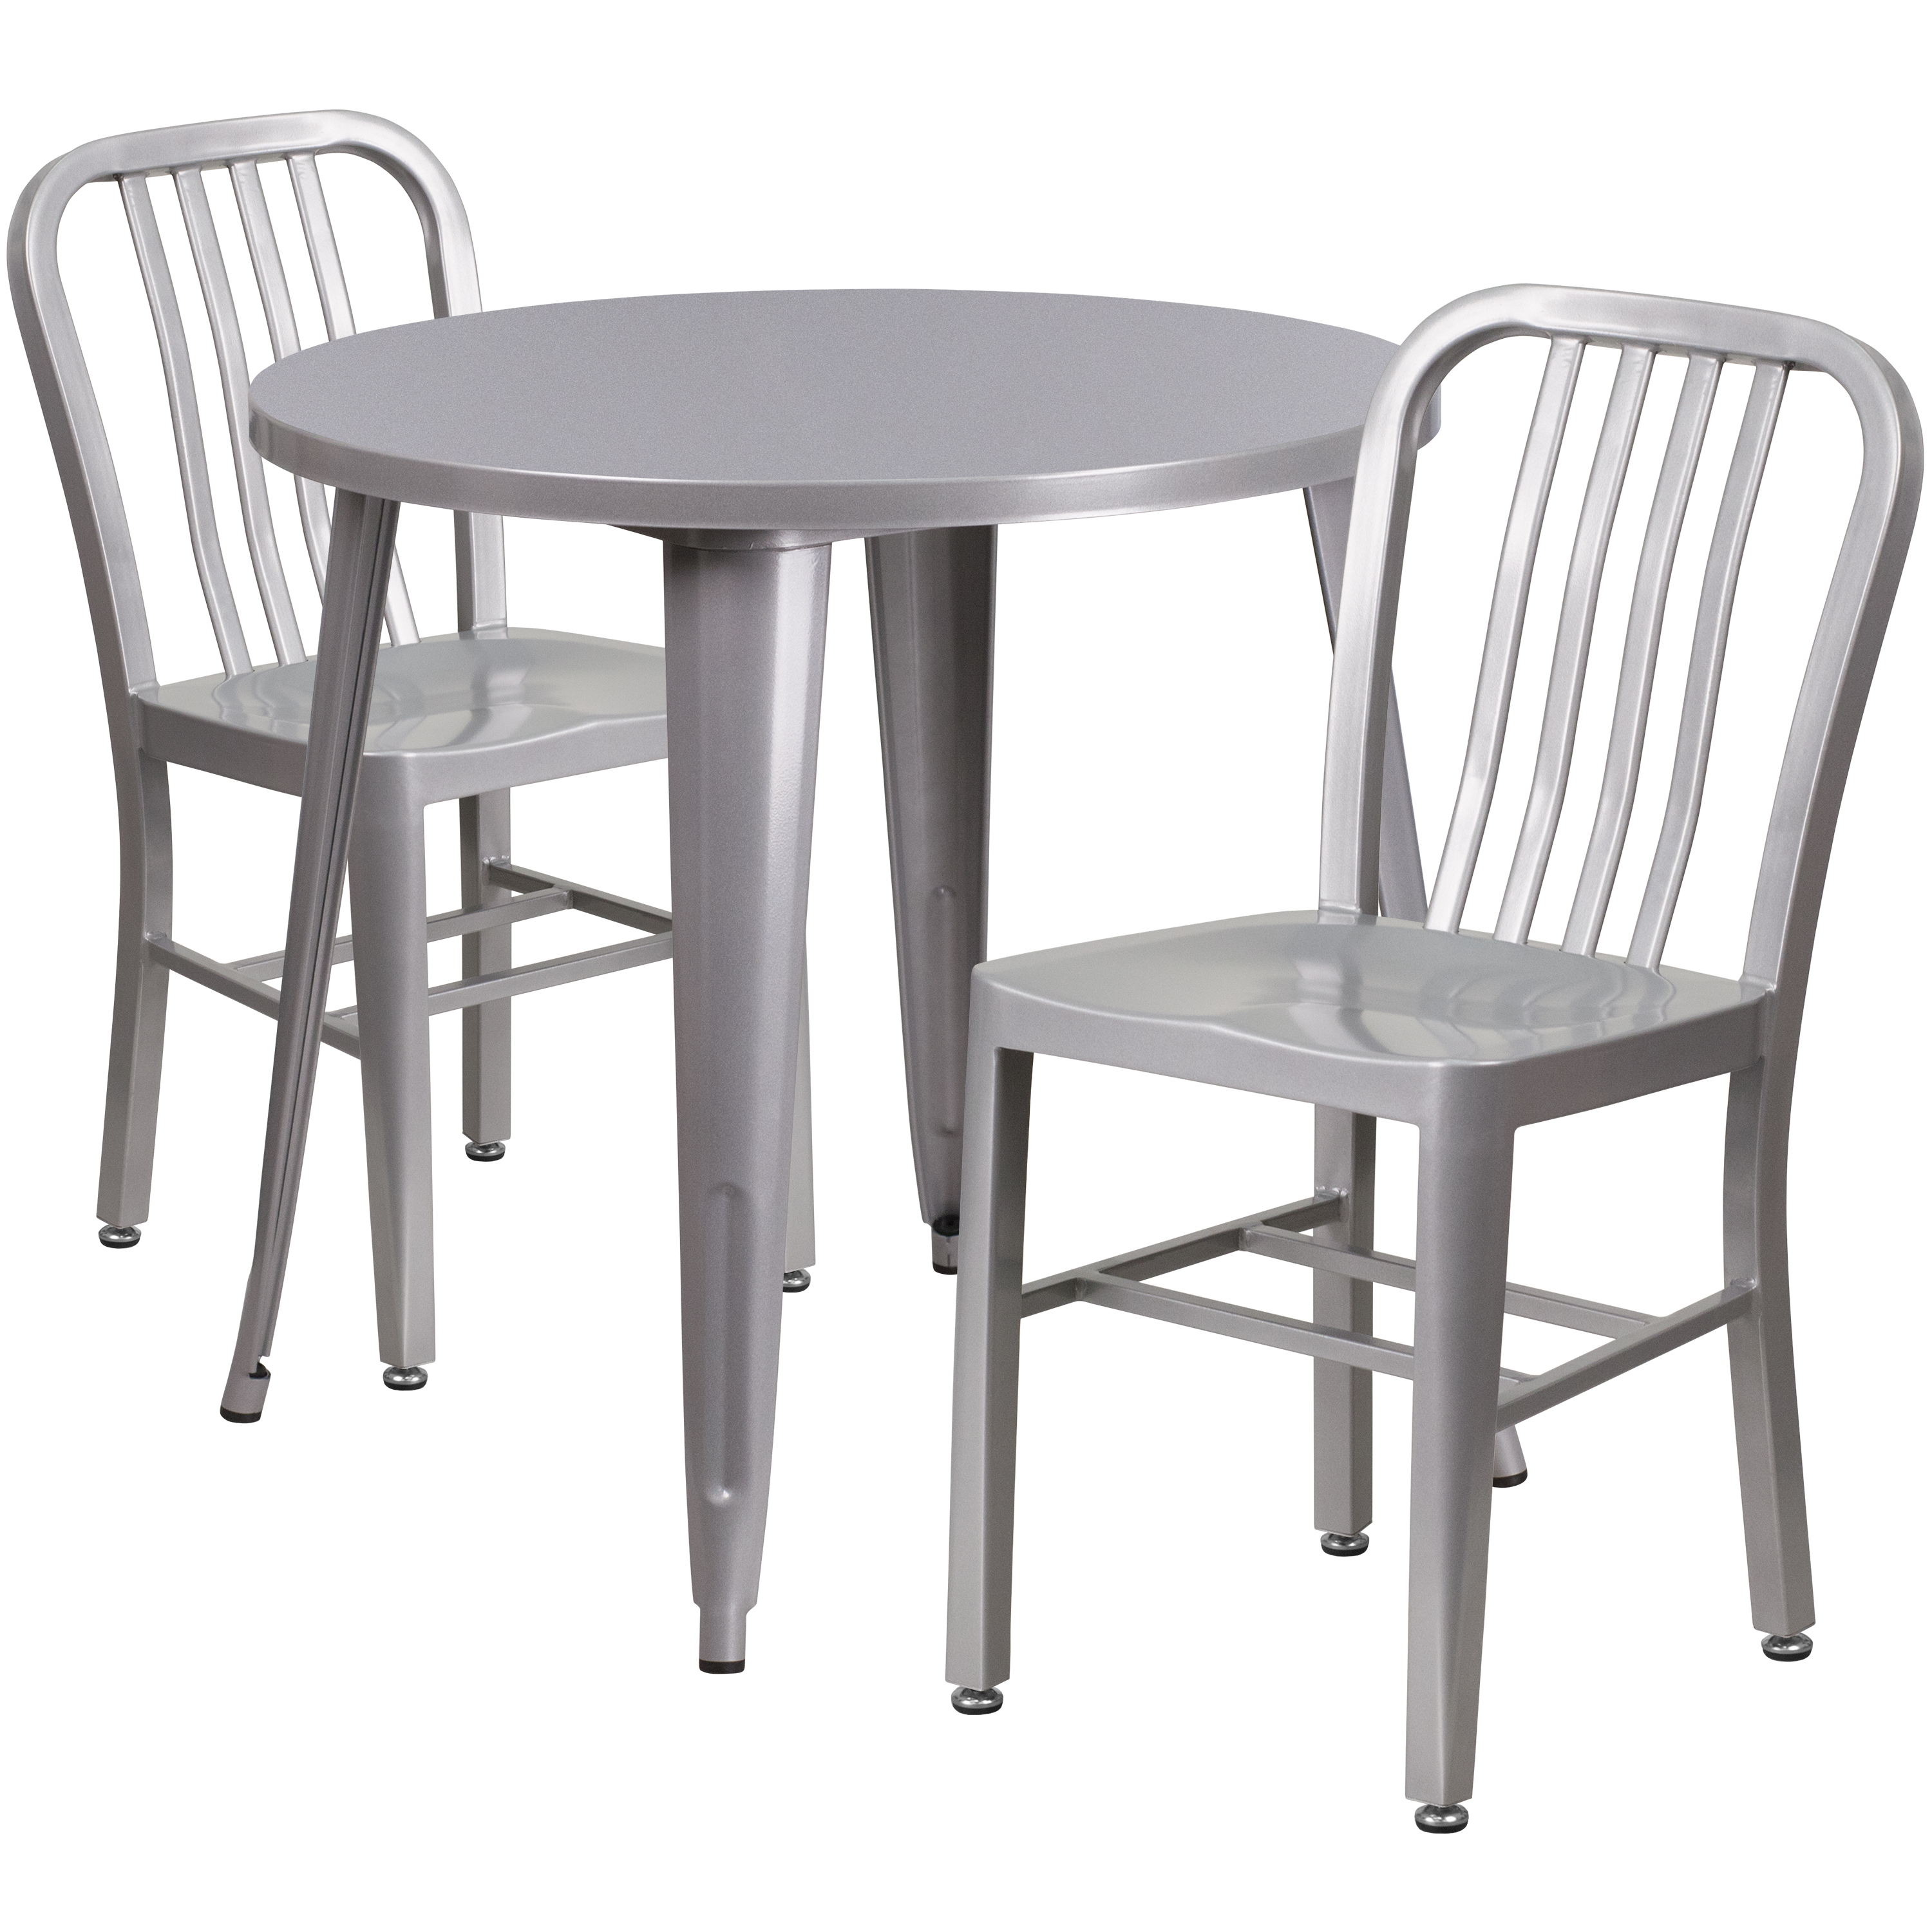 Flash Furniture CH-51090TH-2-18VRT-SIL-GG 30" Round Silver Metal Indoor/Outdoor Table Set with 2 Vertical Slat Back Chairs